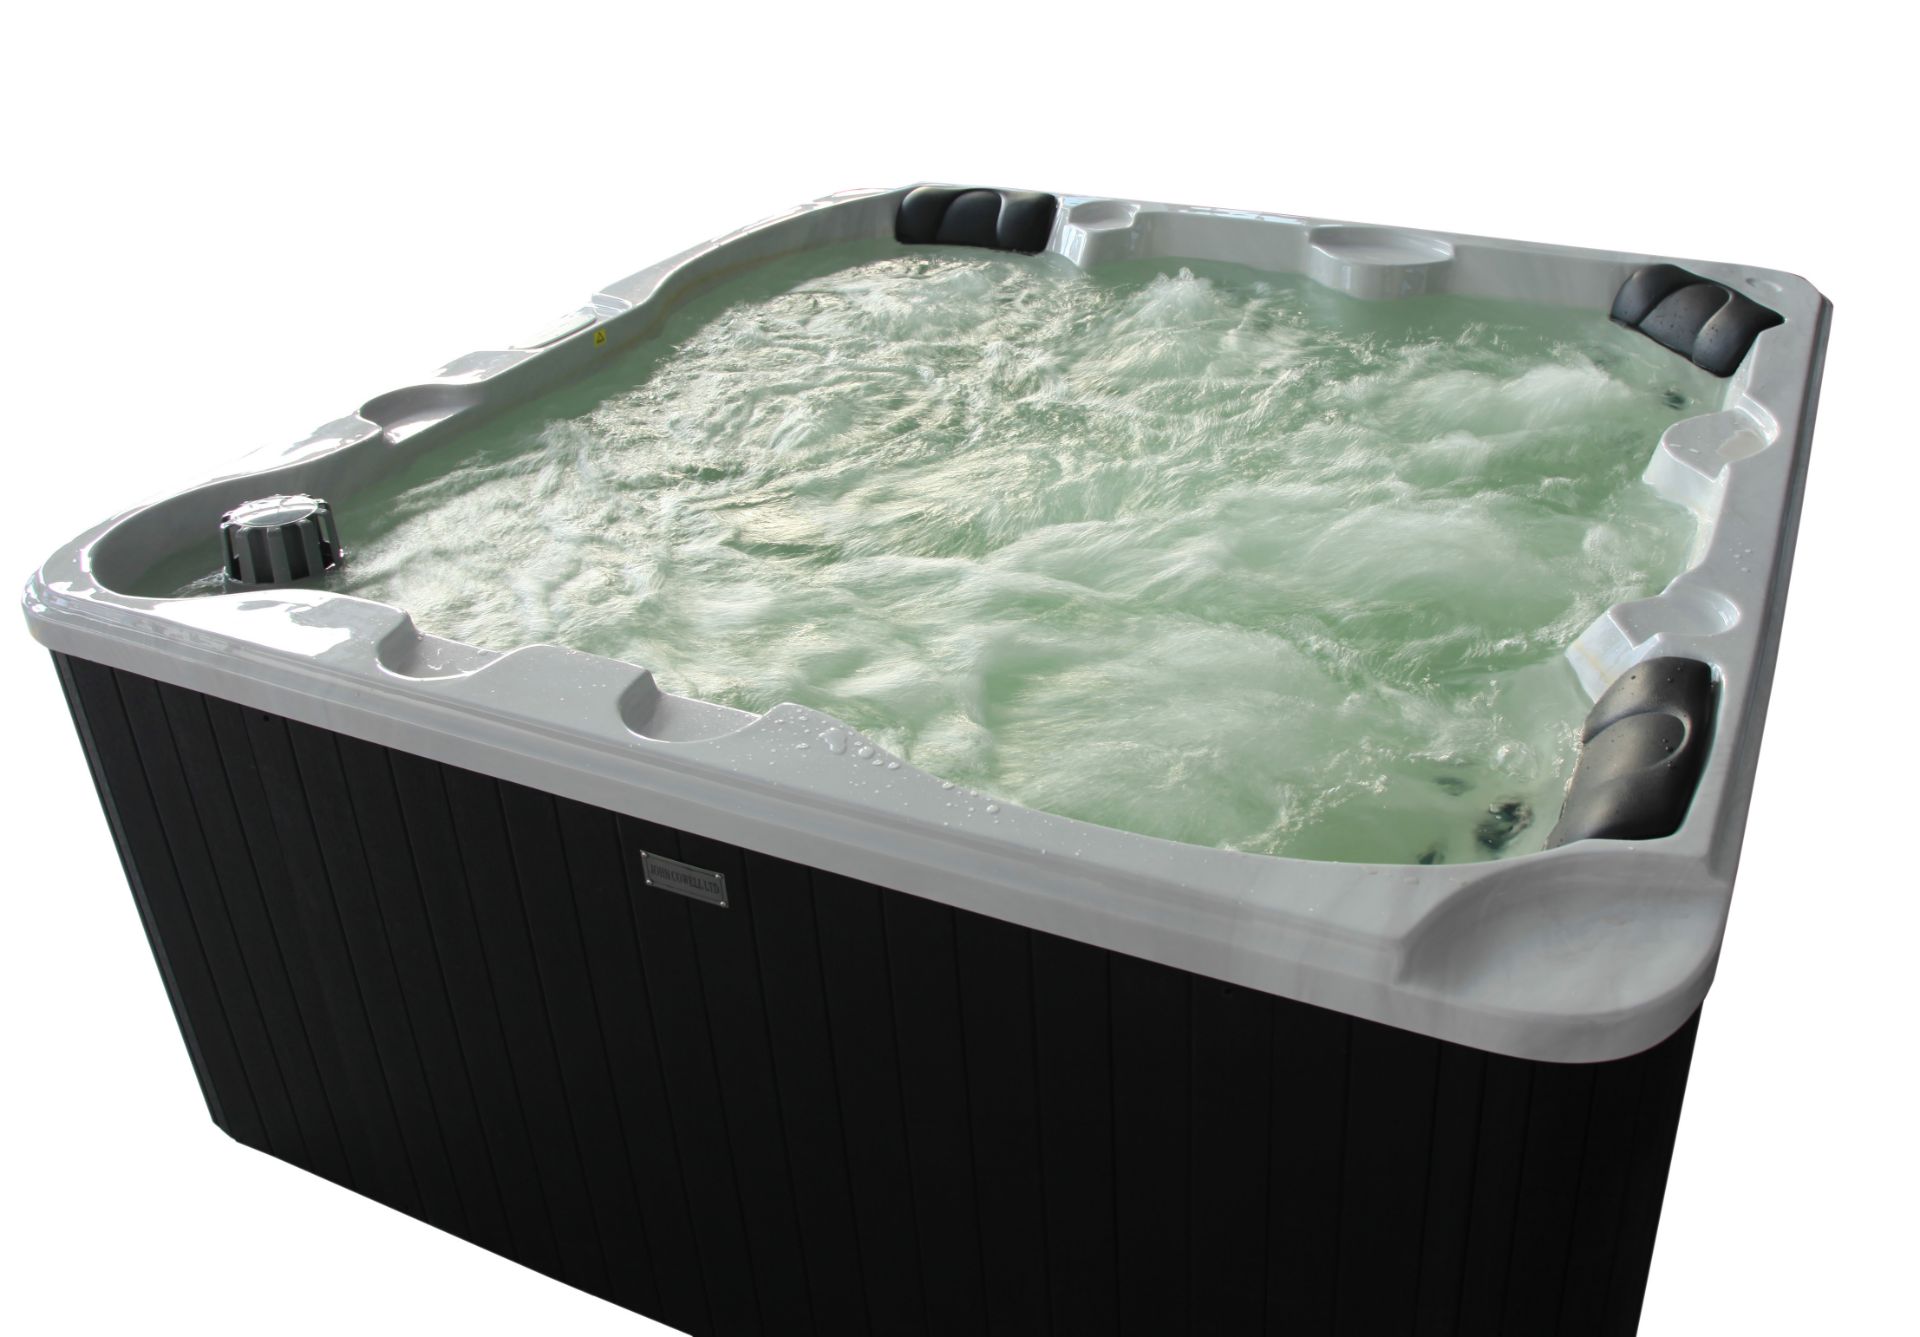 HIGH QUALITY NEW PACKAGED 2015 HOT TUB, MATCHING STEPS, SIDE, INSULATING COVER, TOP USA RUNNING GEAR